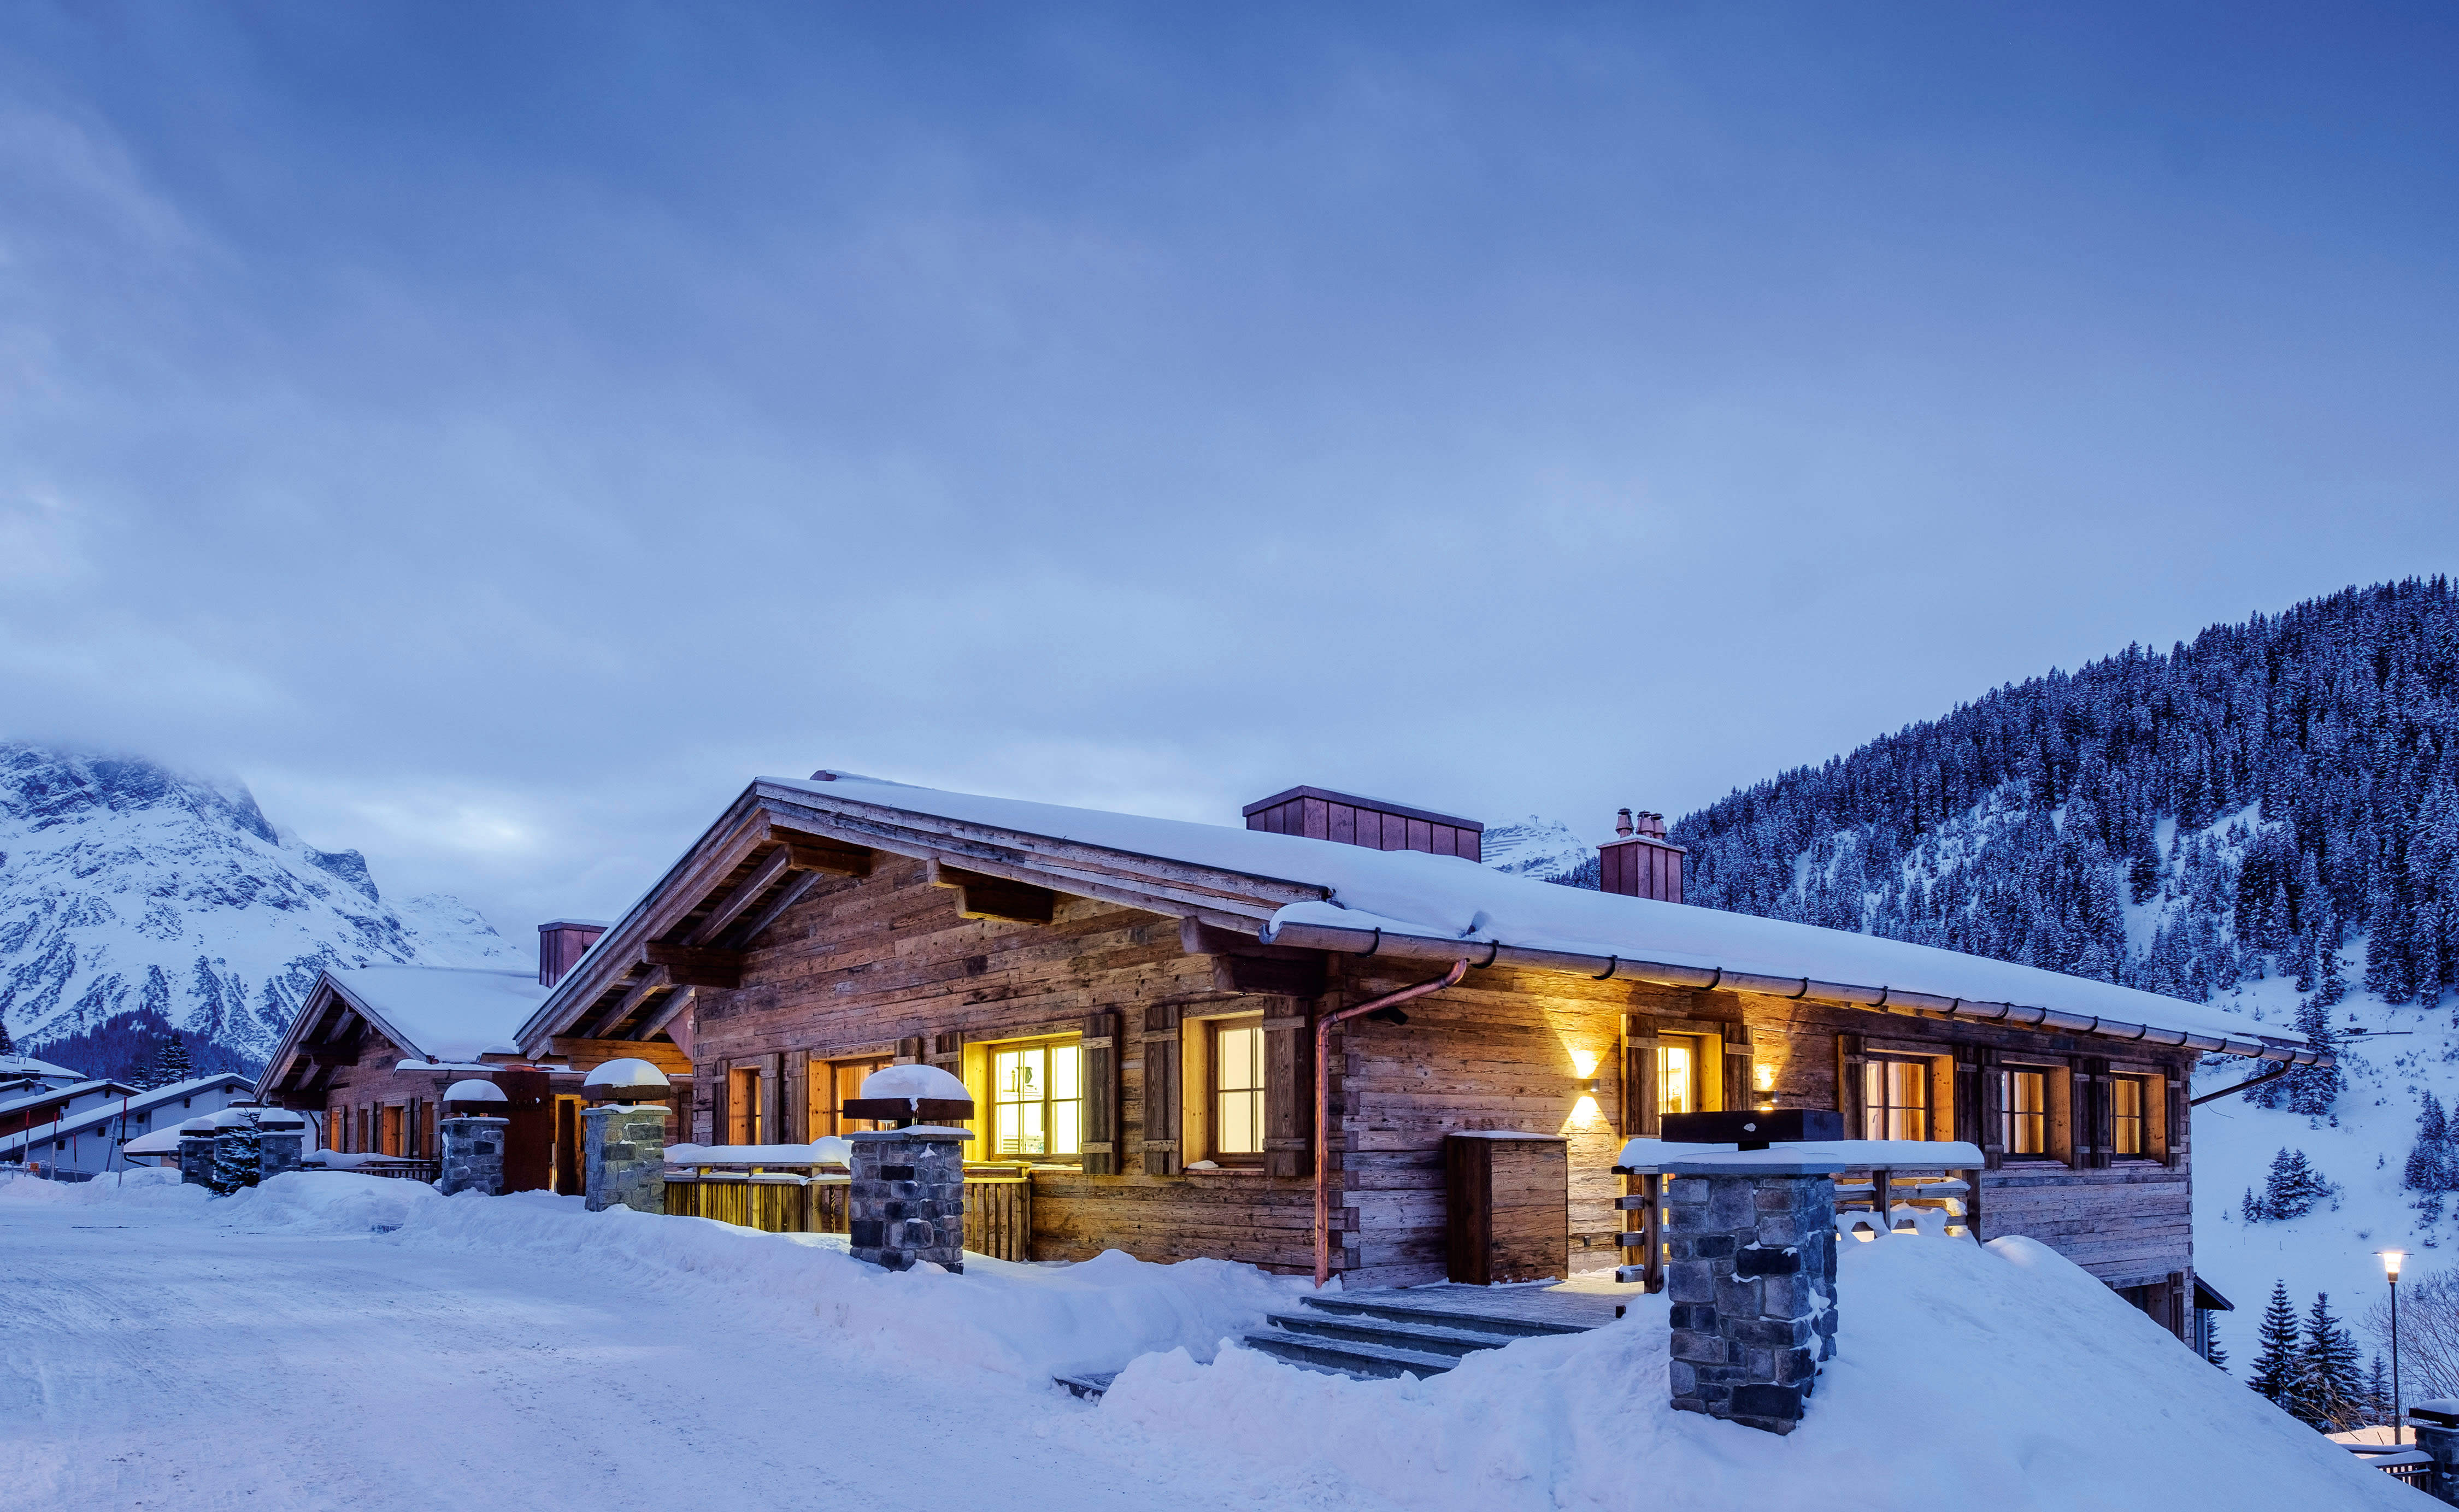 exterior view of ski chalet in the mountains covered in snow